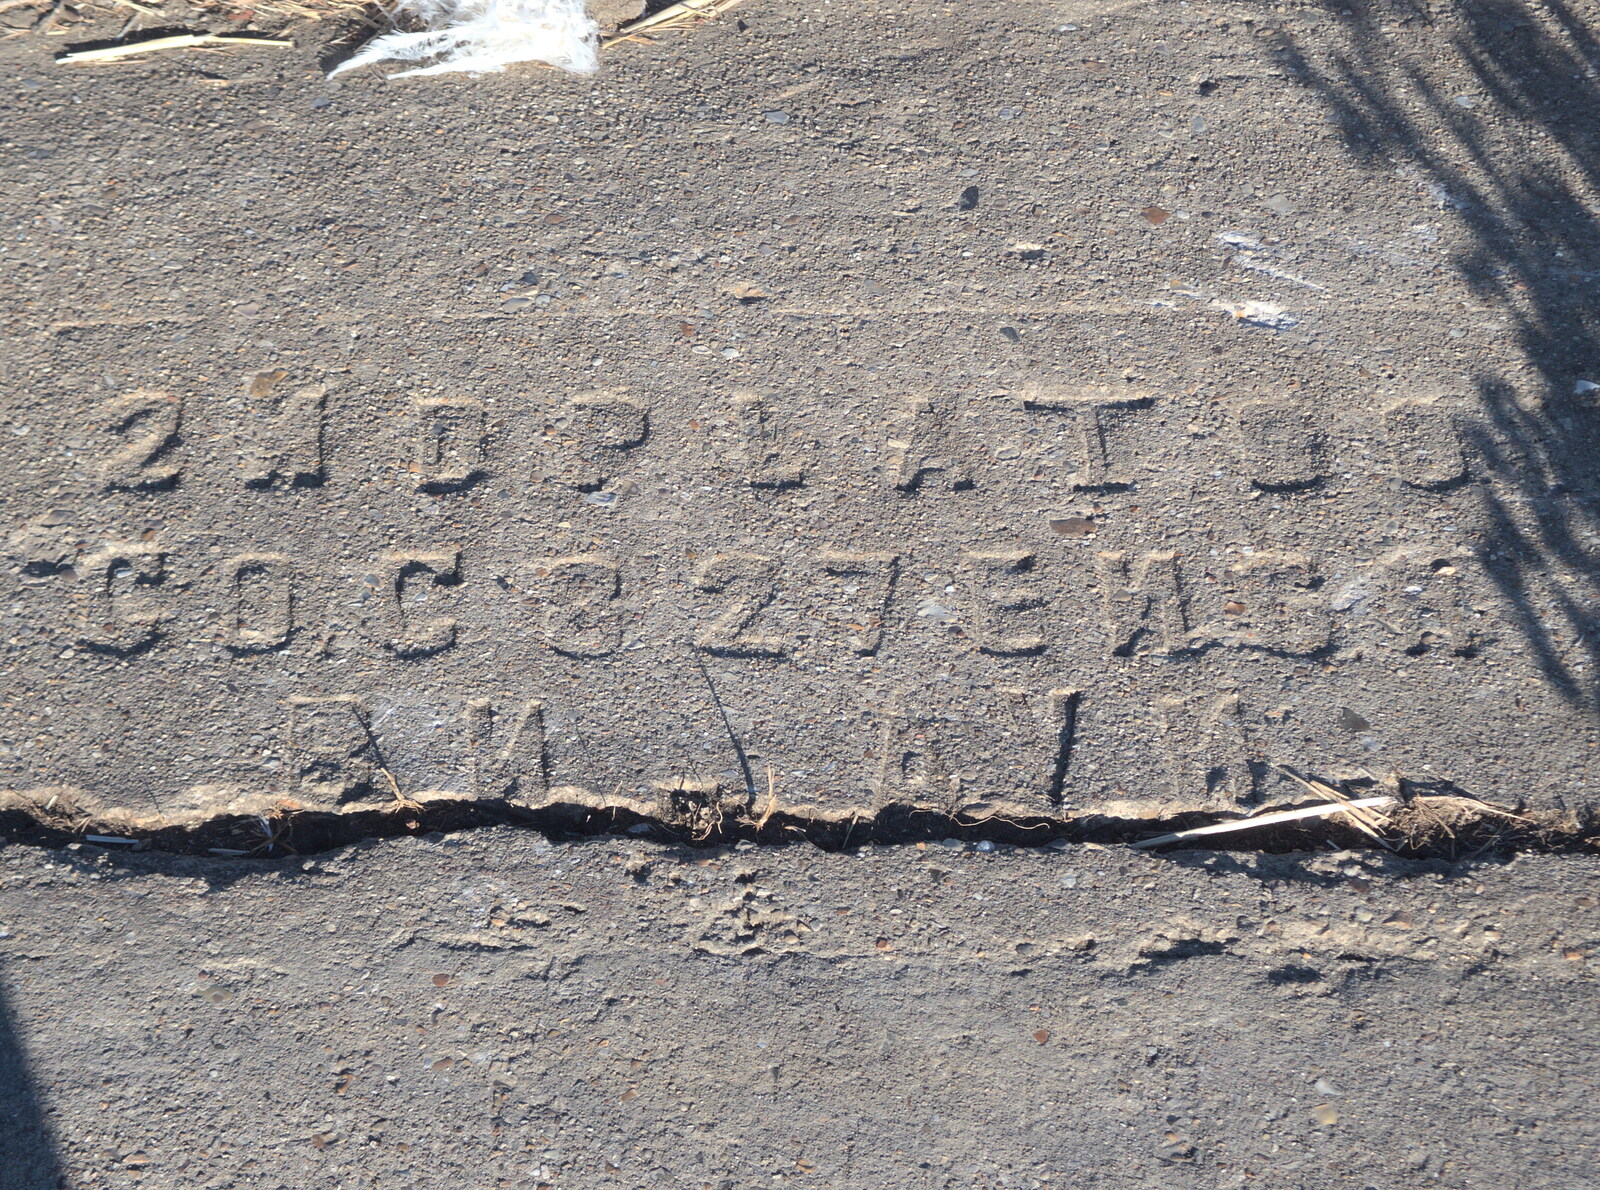 2nd Platoon 827th Engineers written in concrete from Camping at Forest Park, Cromer, Norfolk - 12th August 2022